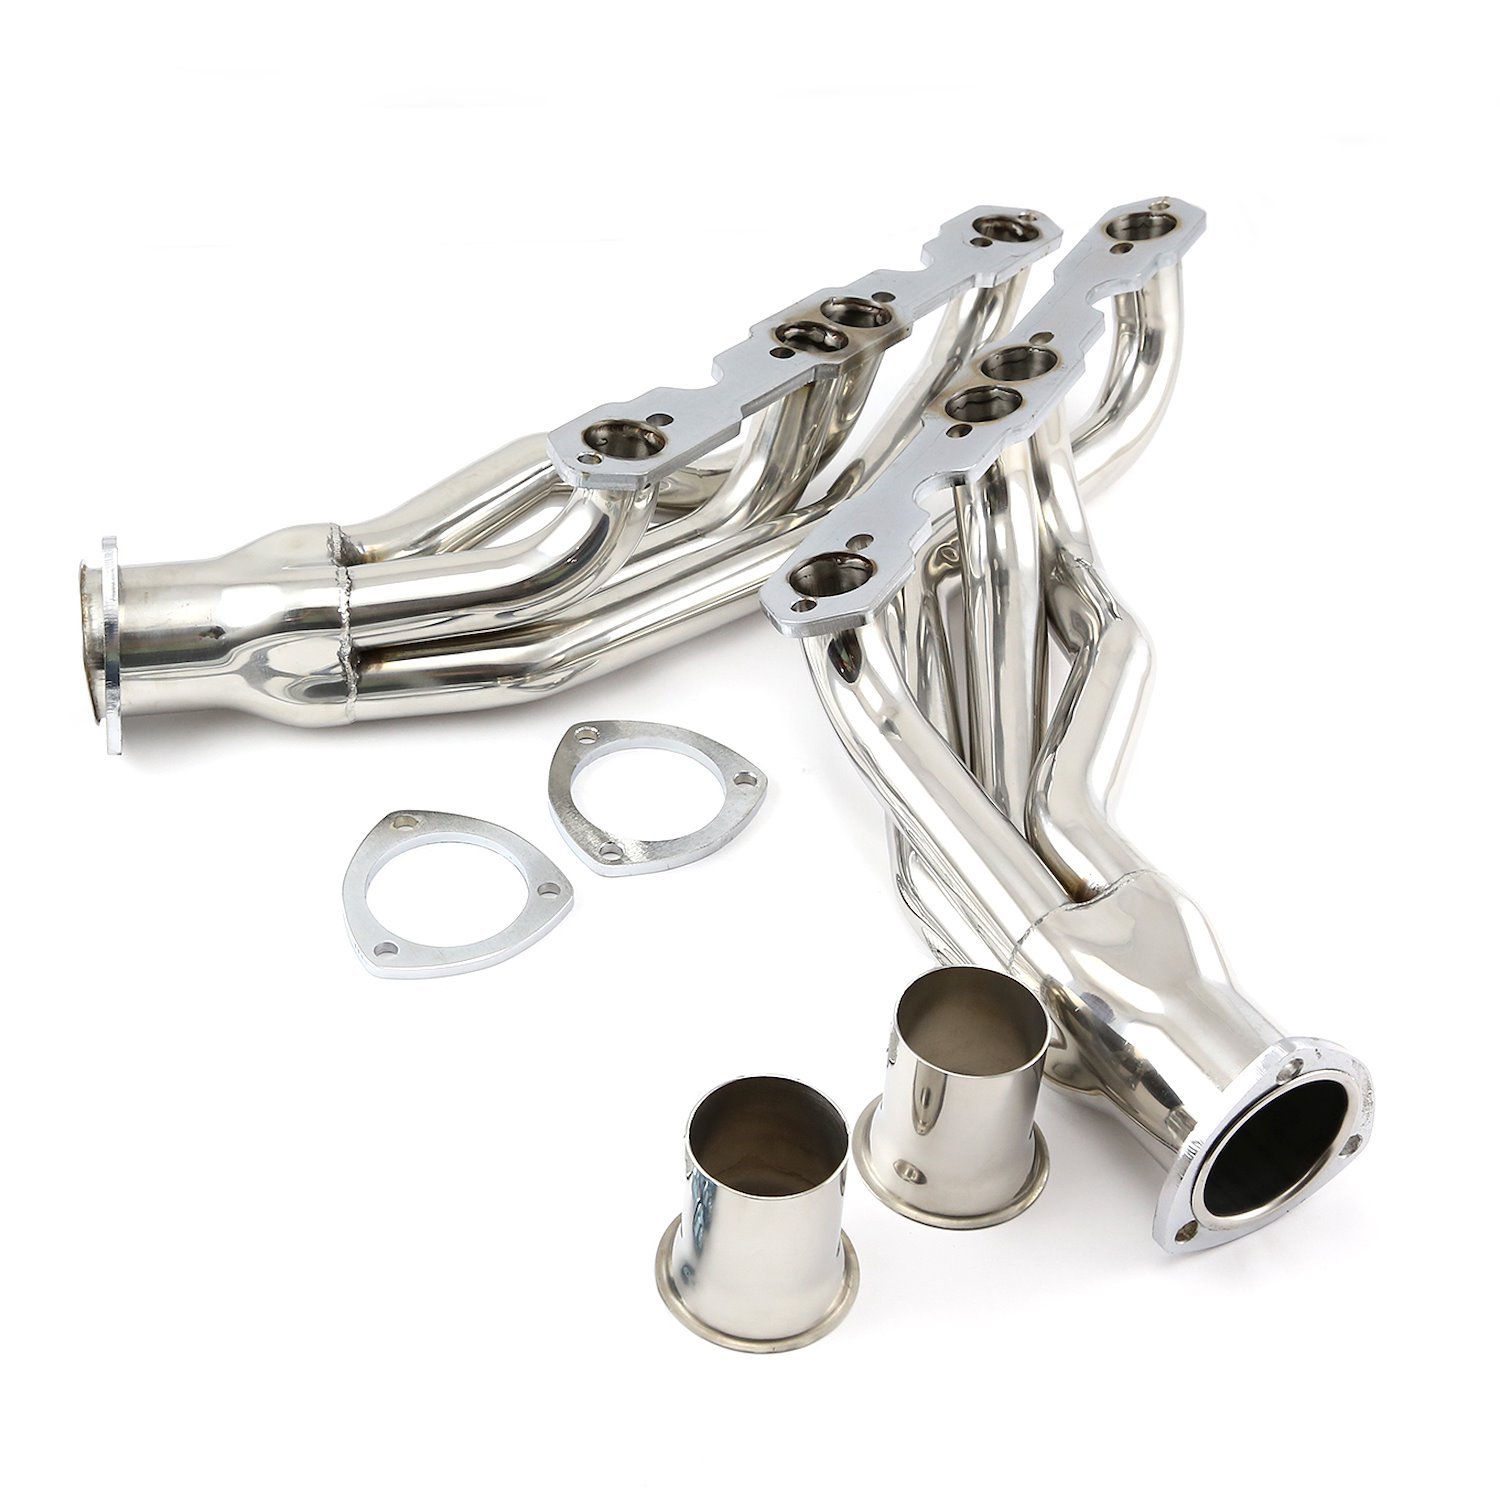 Mid-Length Exhaust Headers 1988-1995 Small Block Chevy 350 Pickup